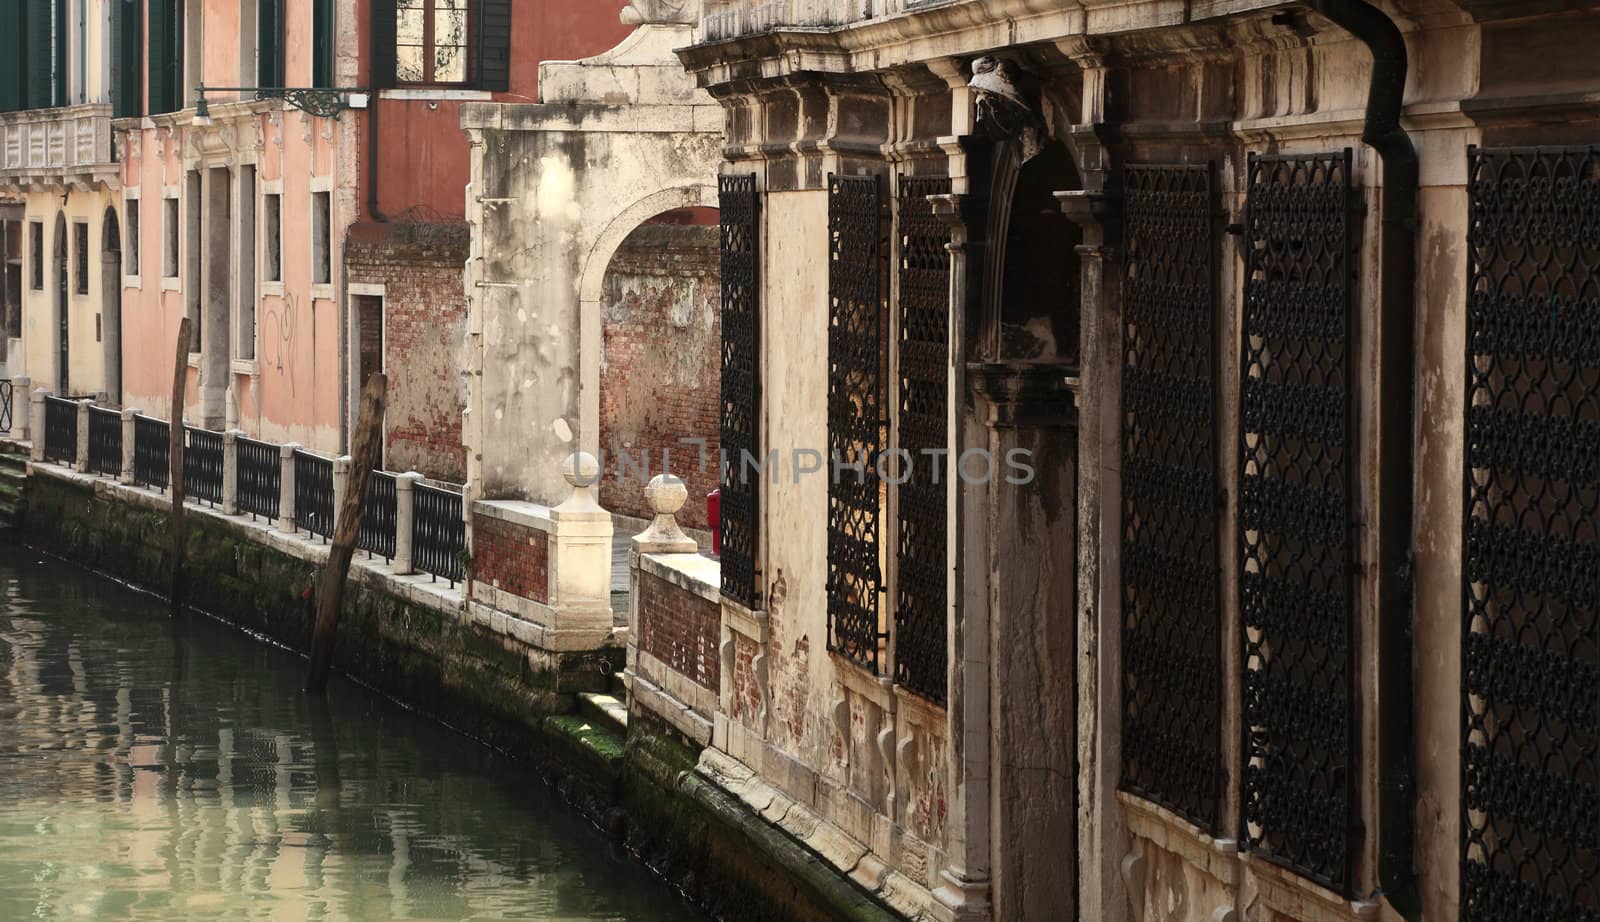 Image of the walls of houses near the water on a small canal in Venice.